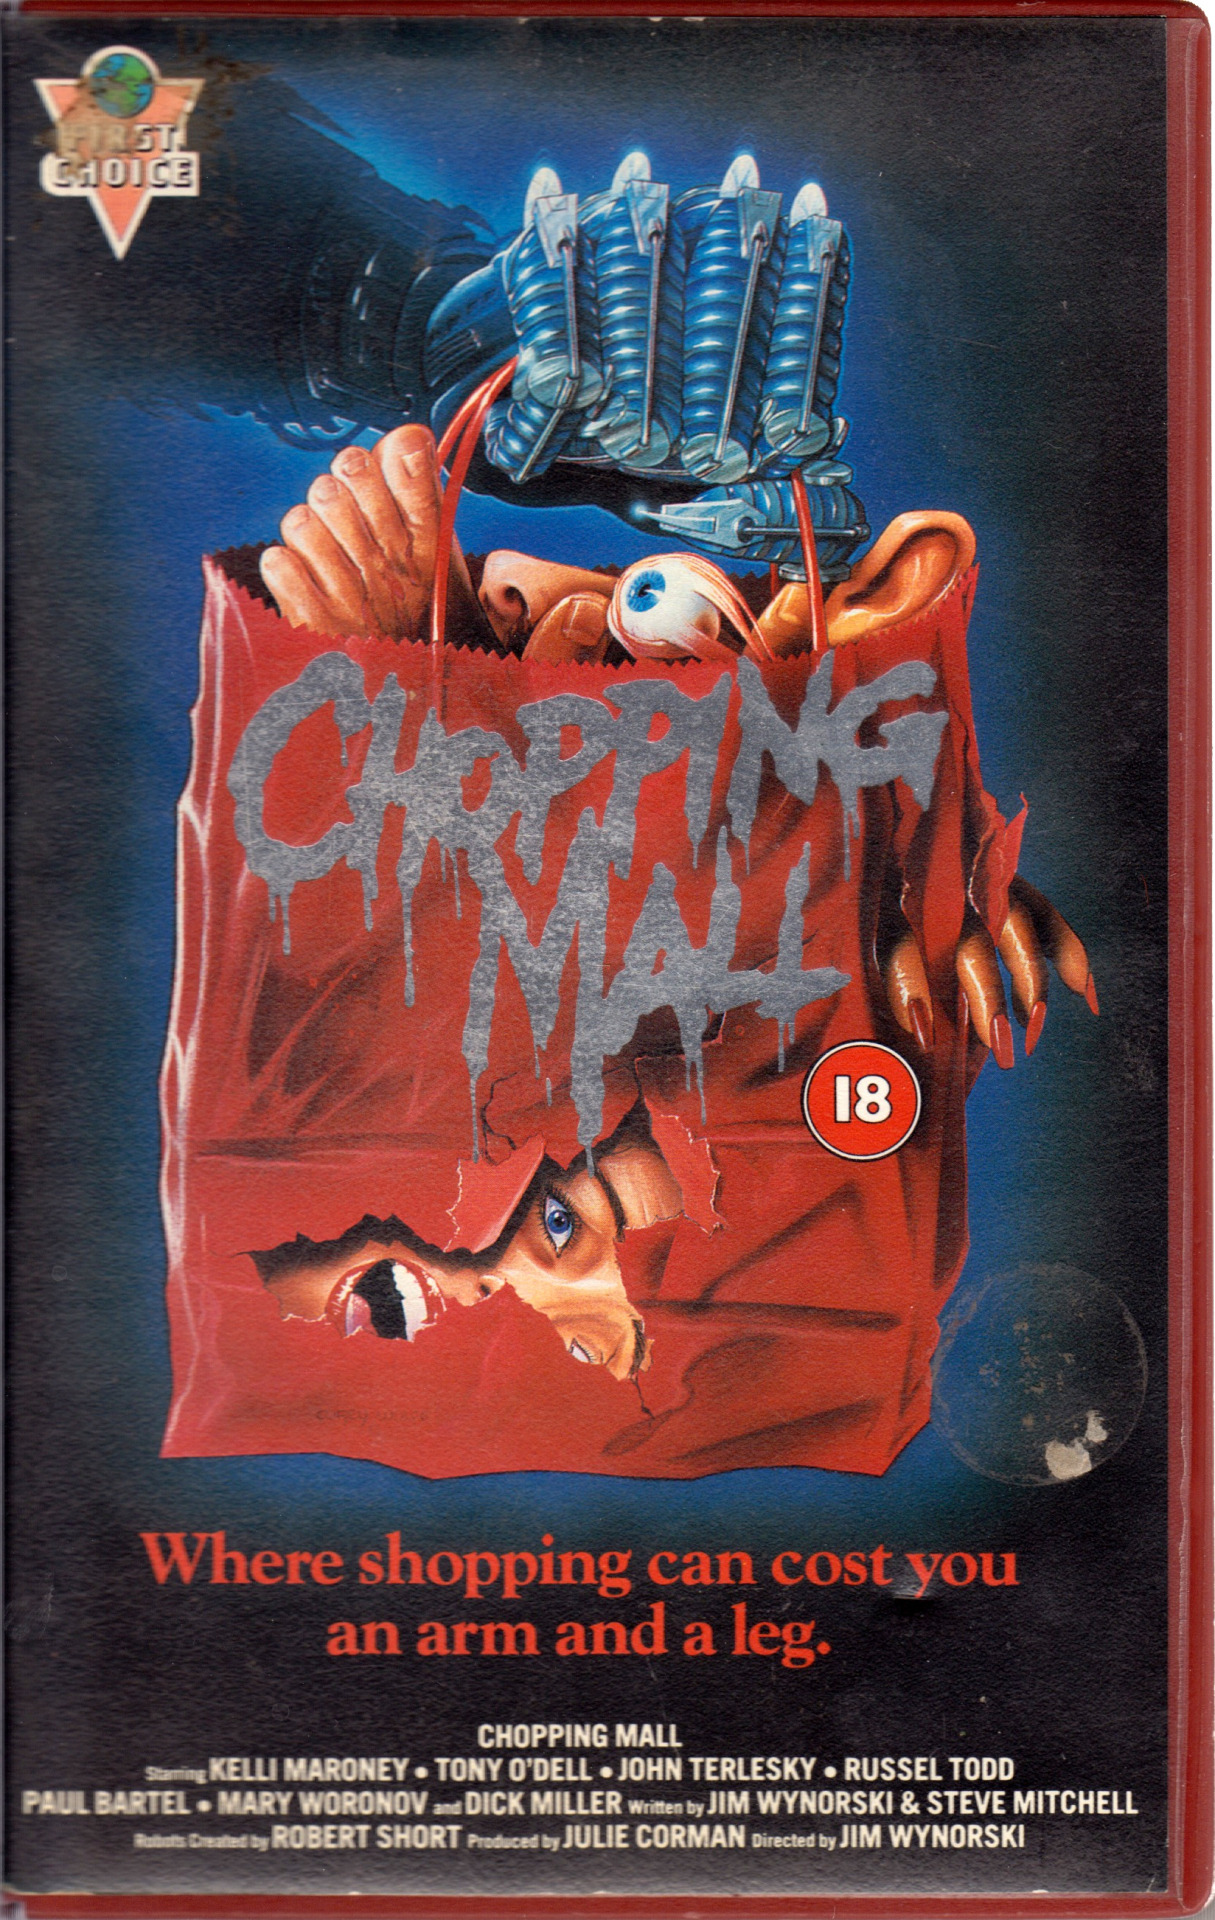 Chopping Mall, Directed by Jim Wynorski, VHS tape (First Choice Video, 1986) From